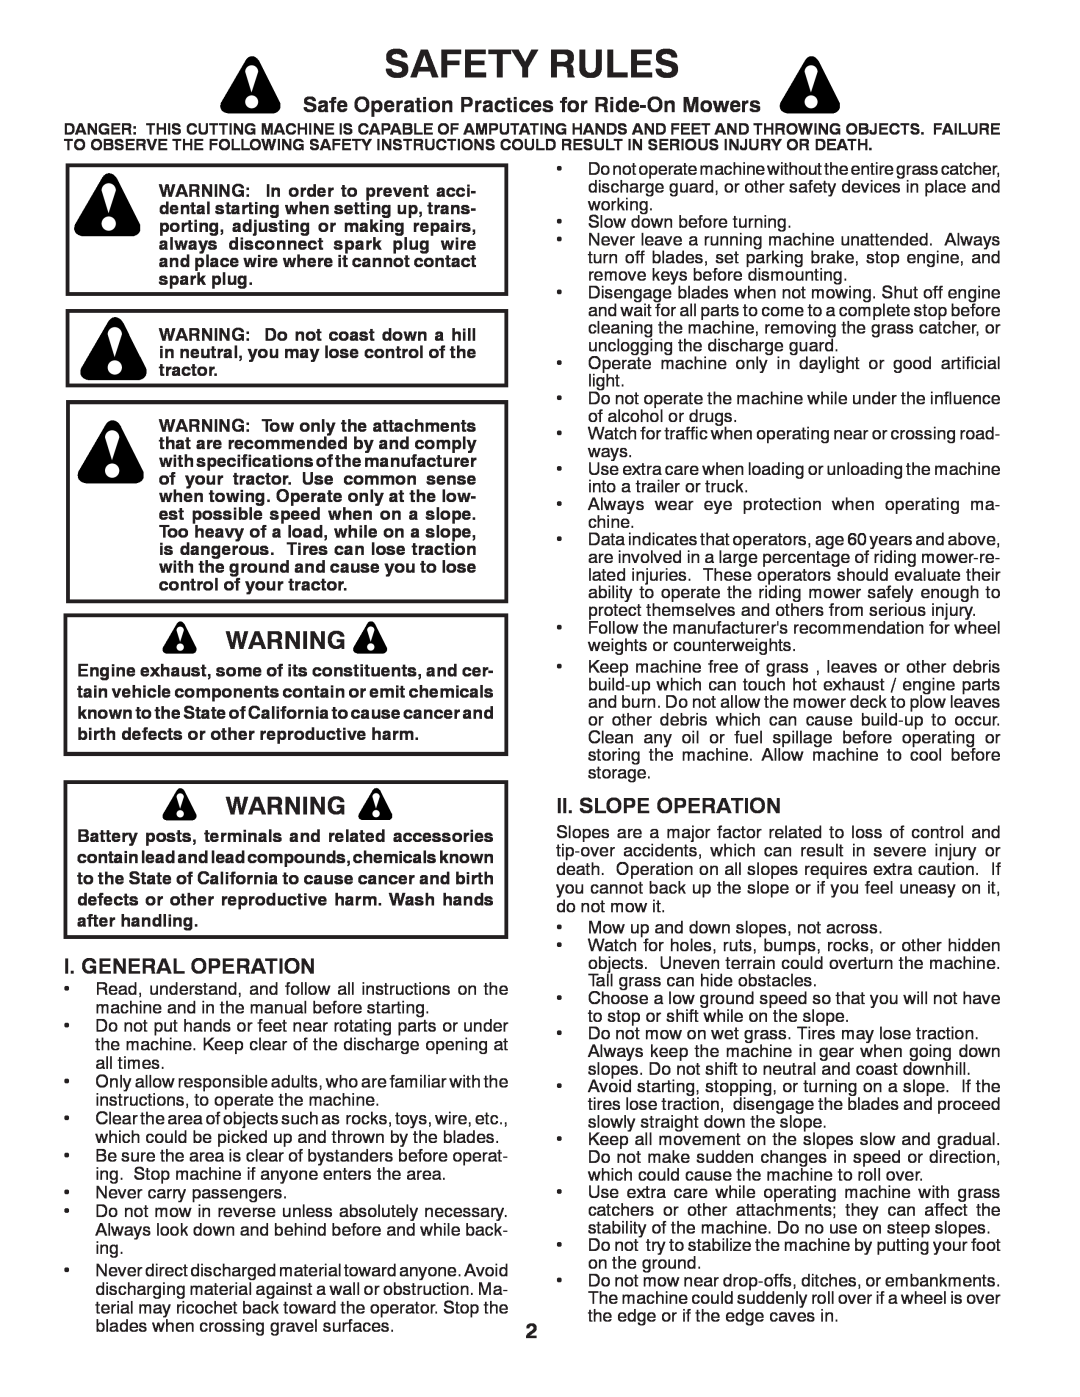 McCulloch 96041011600 Safety Rules, Safe Operation Practices for Ride-On Mowers, I. General Operation, Ii. Slope Operation 